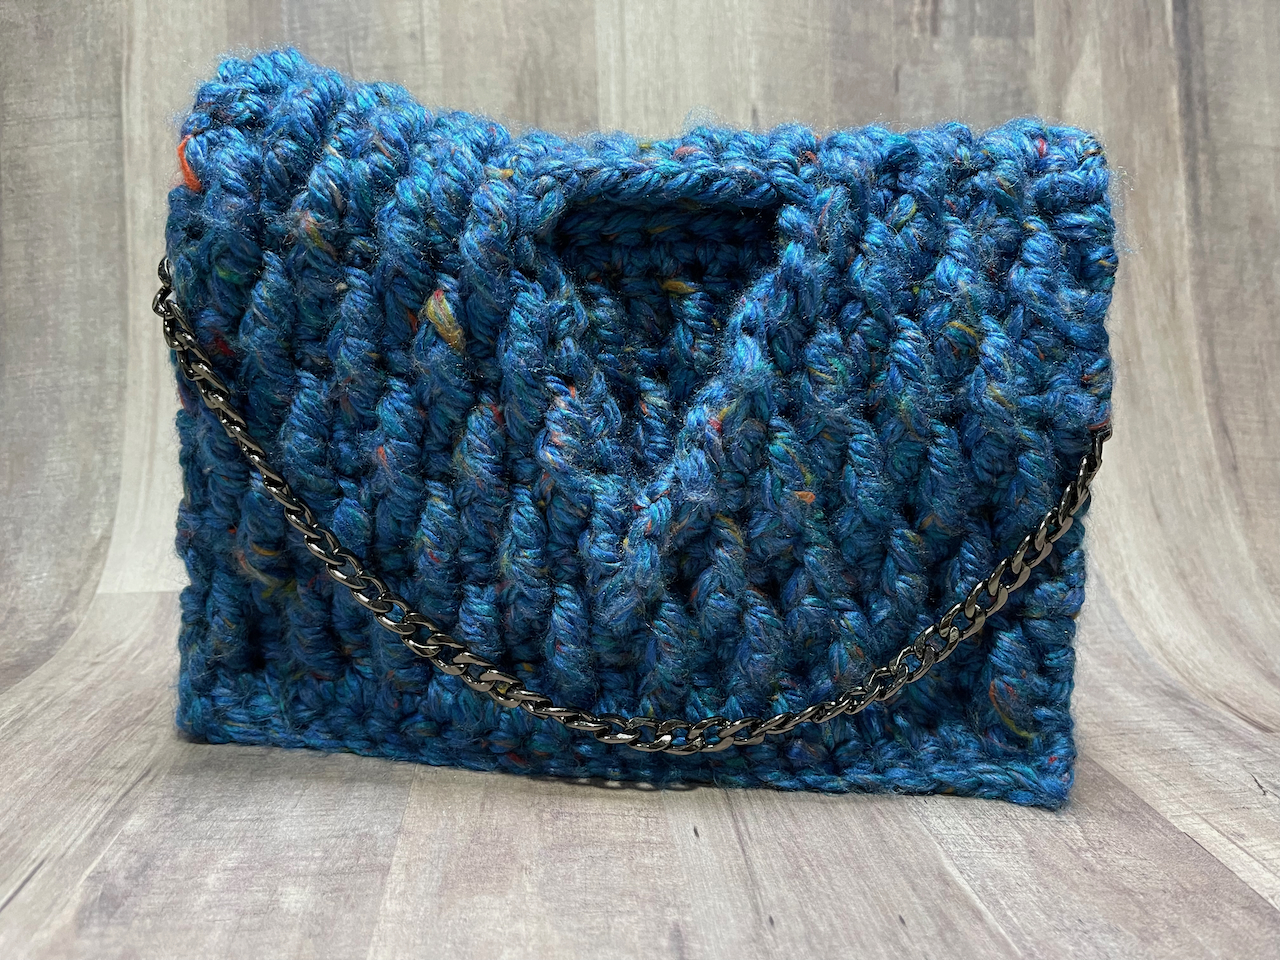 Image of a a crochet bag in chunky blue yarn. The bag is made with textured post stitches and a triangle opening. This crochet pattern is only available in the Crochet for Me bundle.